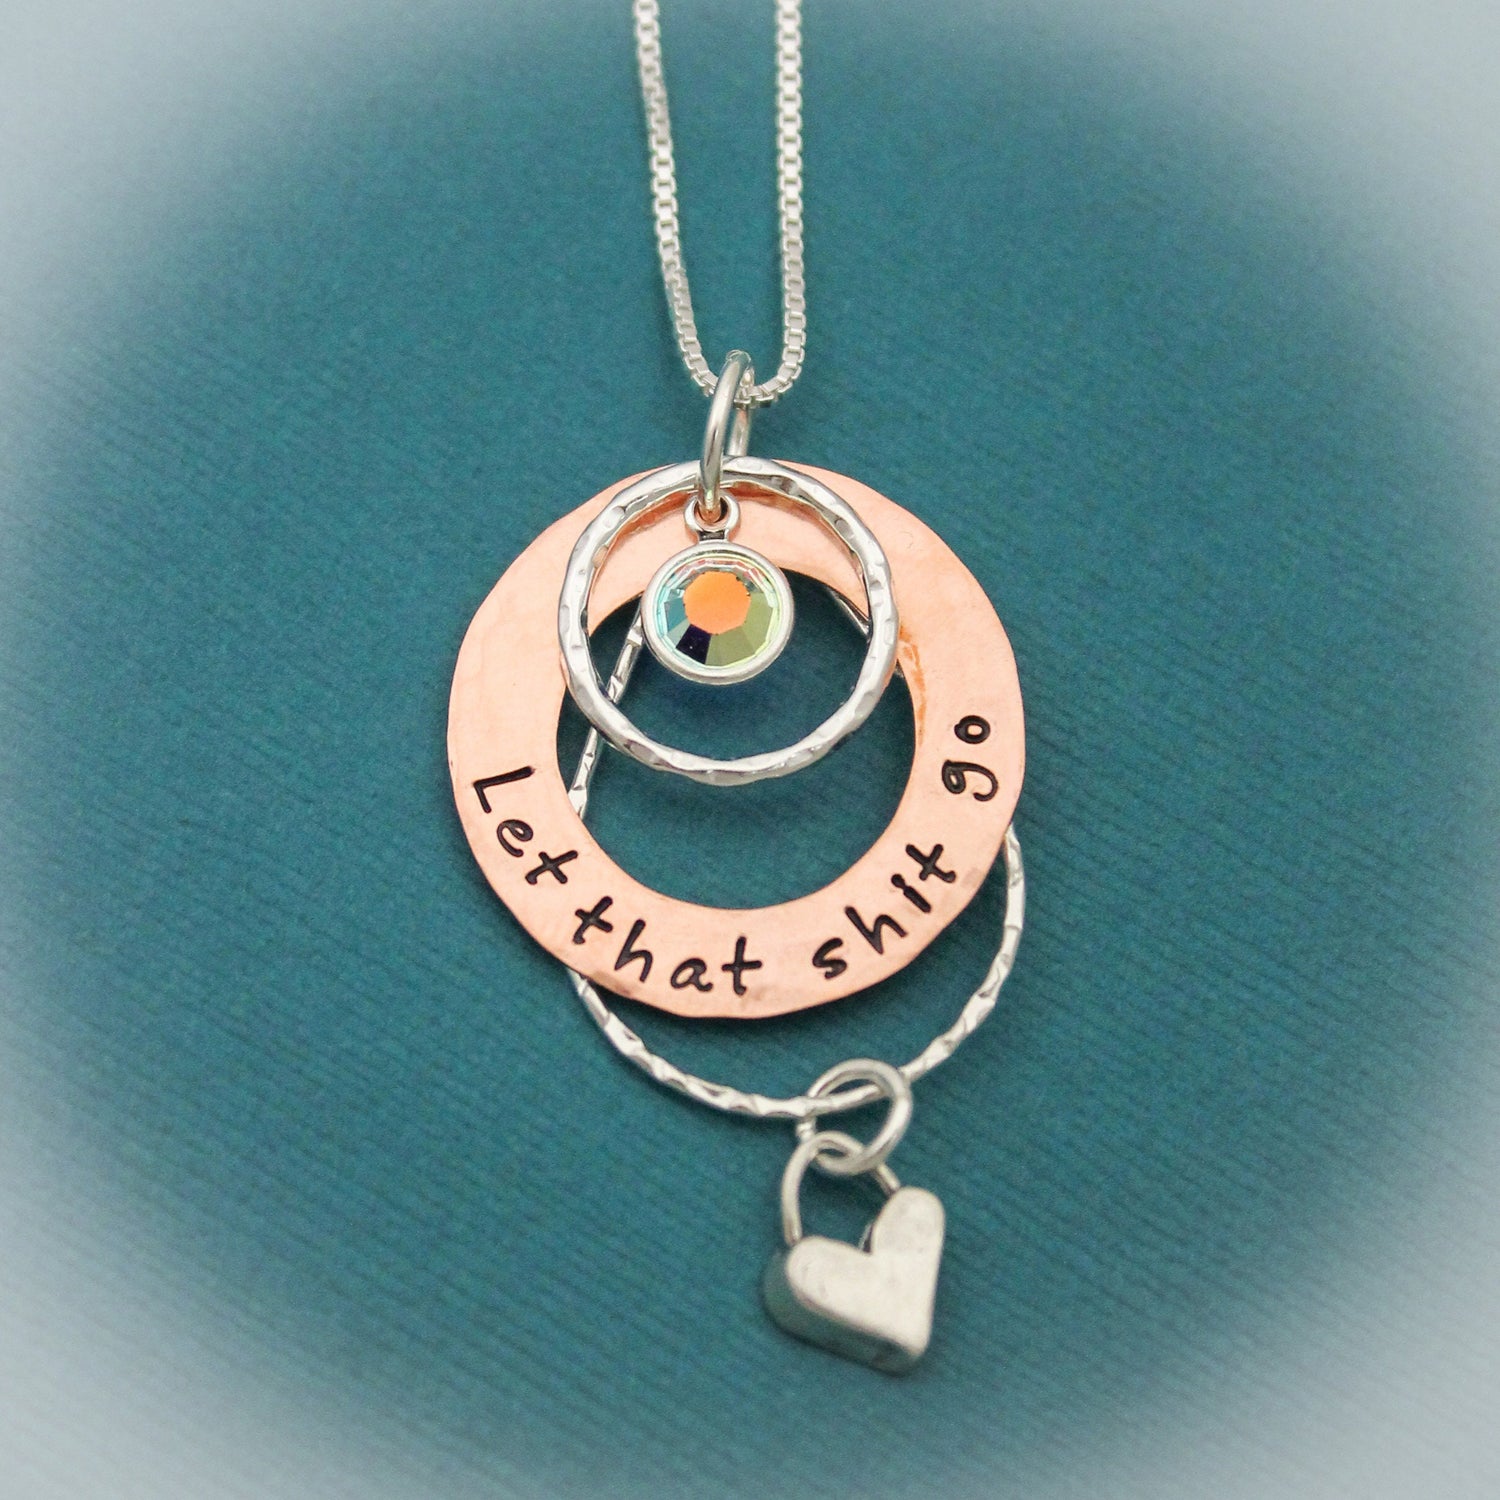 Let That Shit Go Necklace, Heart Washer Necklace, Layered Necklace, Copper & Sterling Silver Washer Necklace, Hand Stamped Let That Shit Go